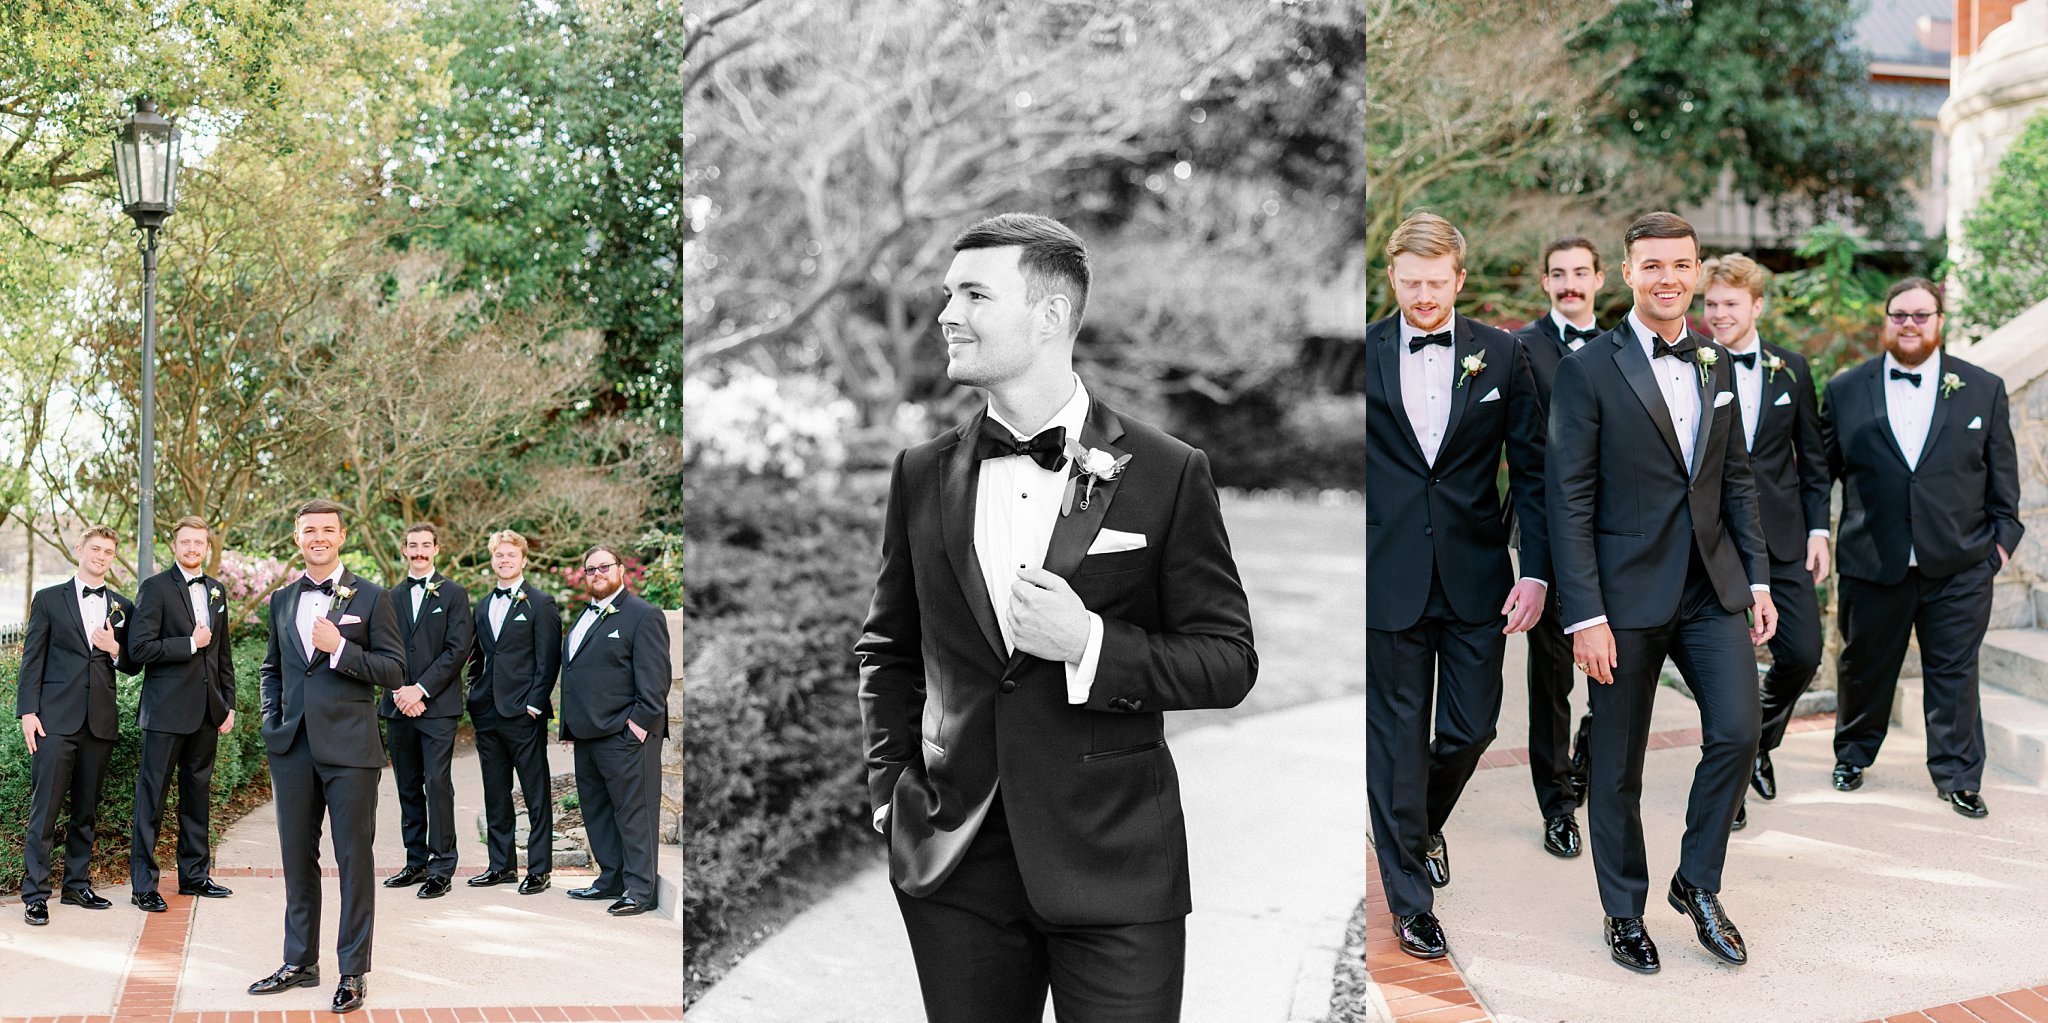 Classic Southern garden wedding. Where to have a black tie wedding in Augusta Georgia.